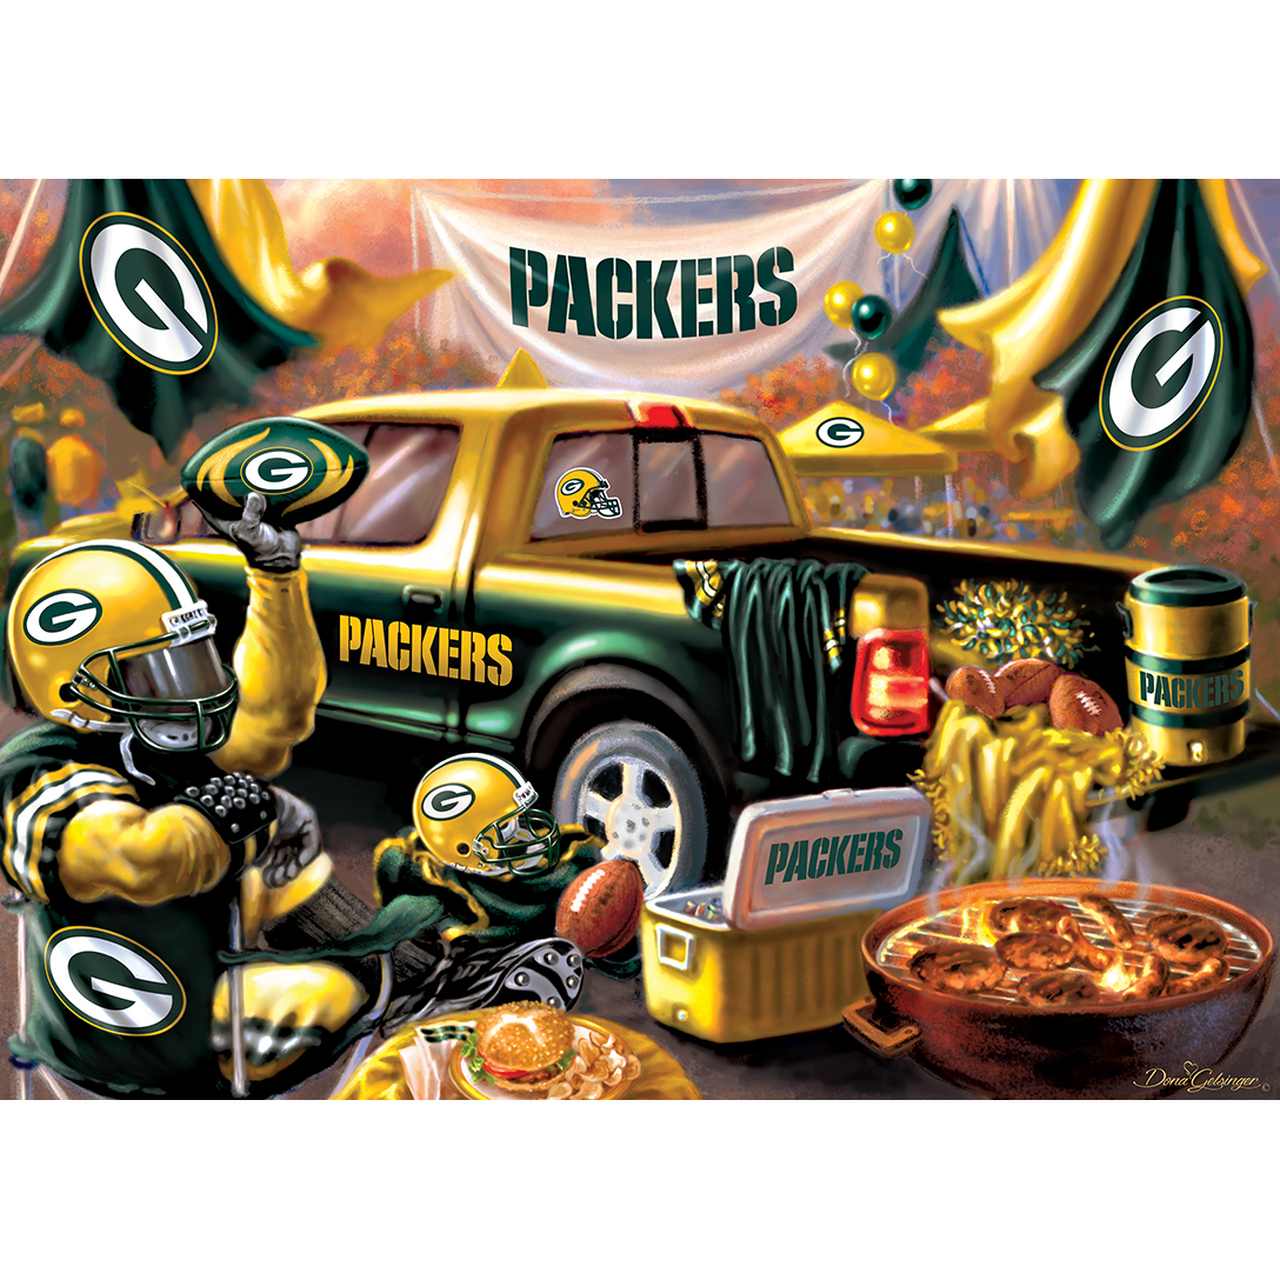 game day green bay packers